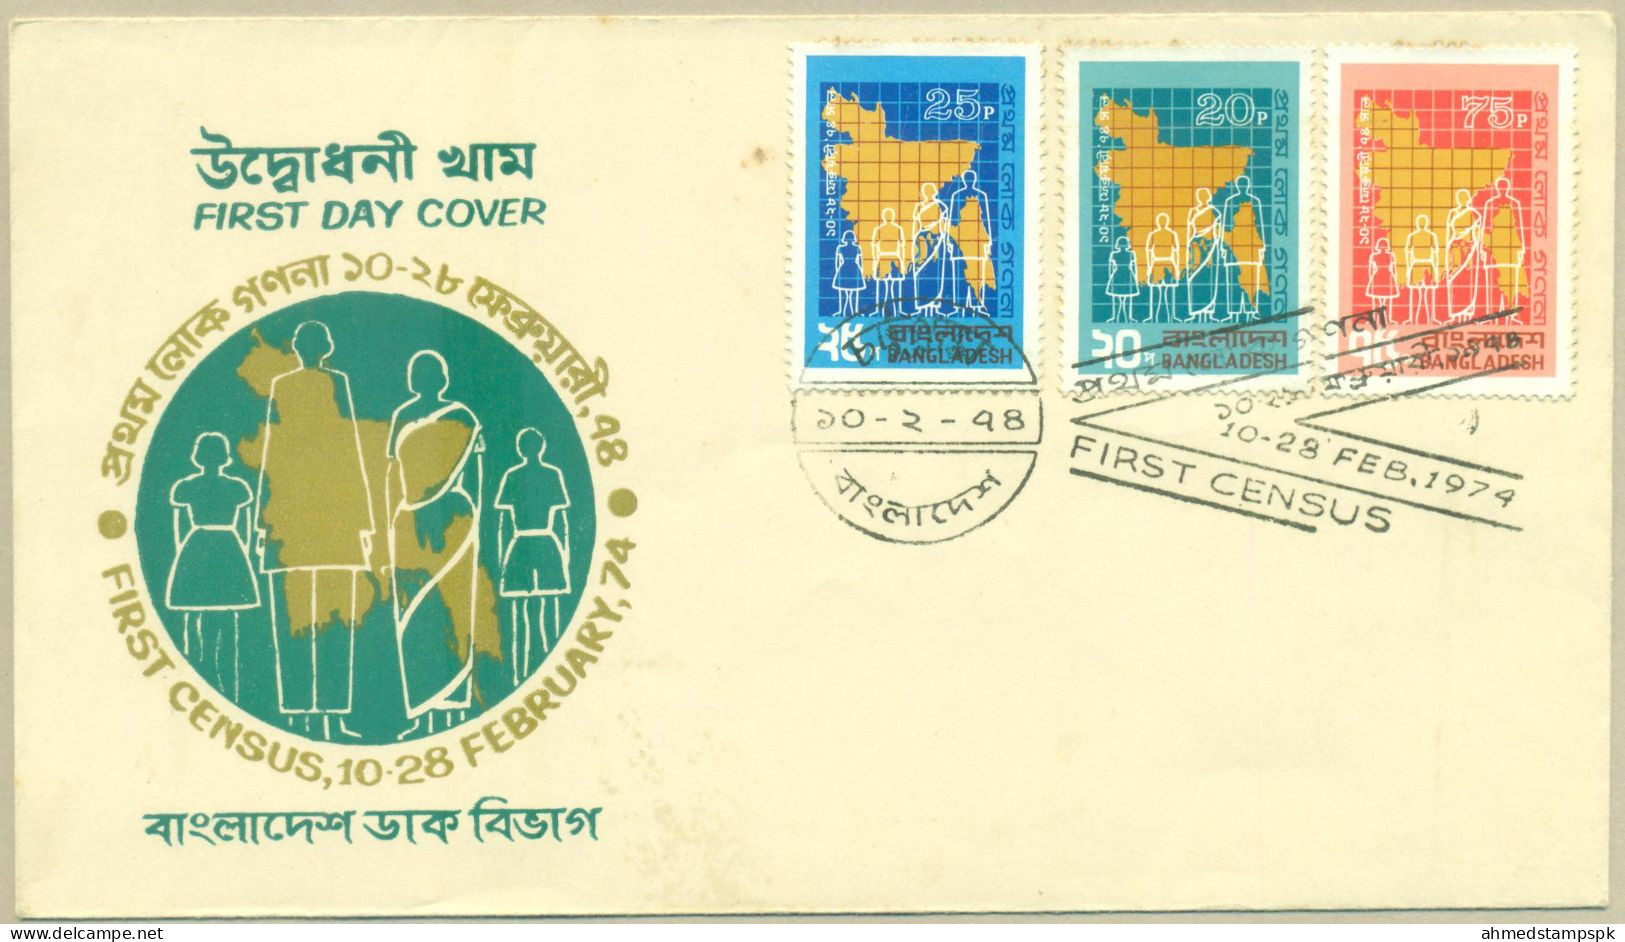 BANGLADESH 1974 MNH FDC FIRST POPULATION CENSUS MAN WOMAN CHILD GIRL BOY FAMILY FIRST DAY COVER - Bangladesh